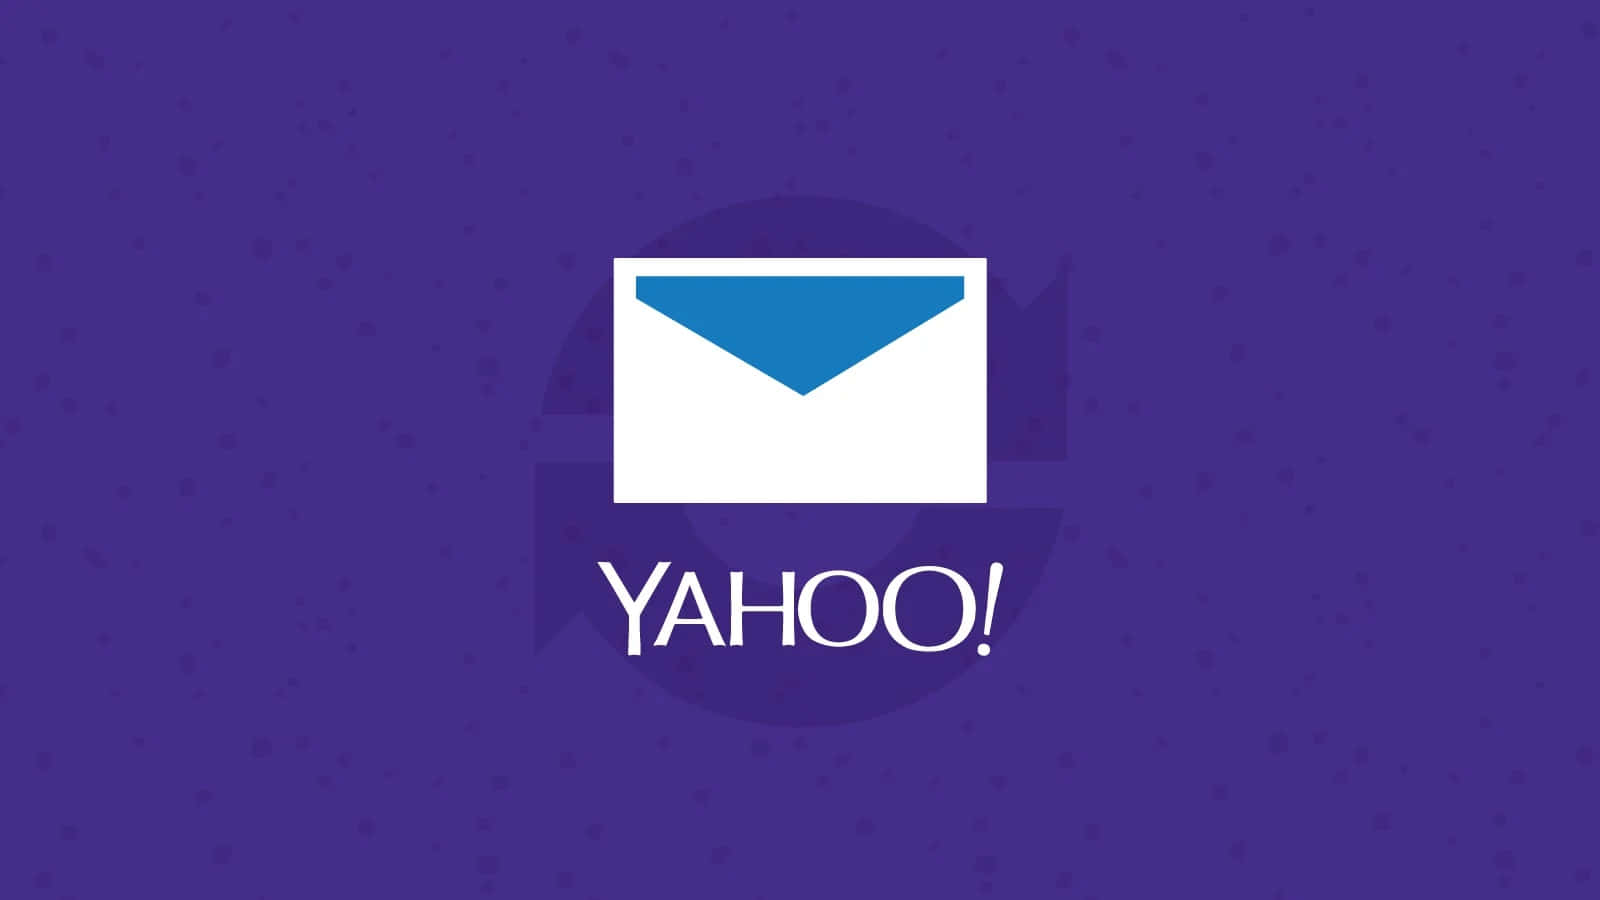 Discover and Learn More with Yahoo